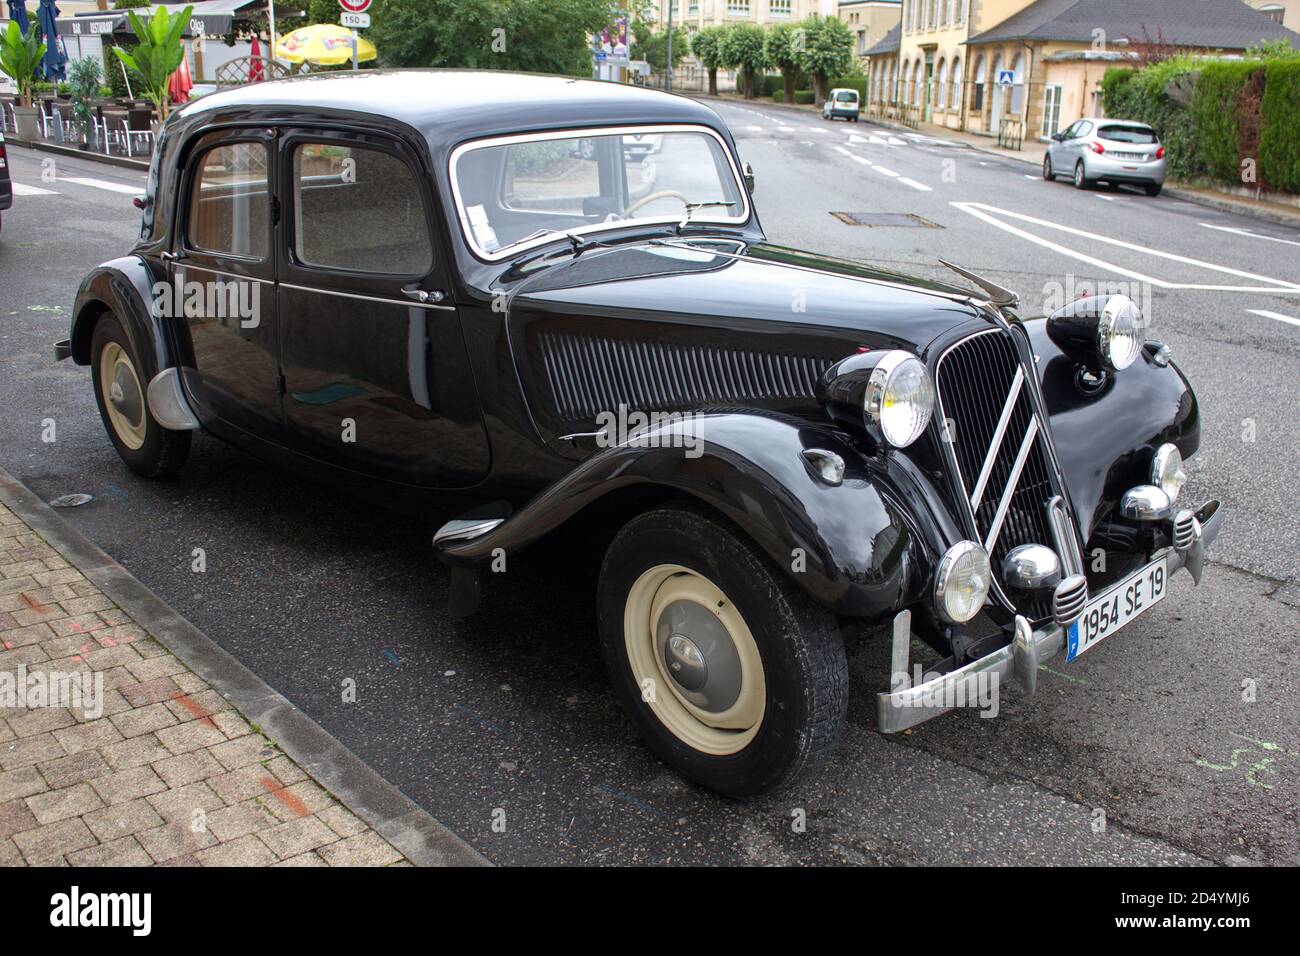 Citroen Traction Avant 15-Six Berline, vintage French car from 1954 in  France Stock Photo - Alamy